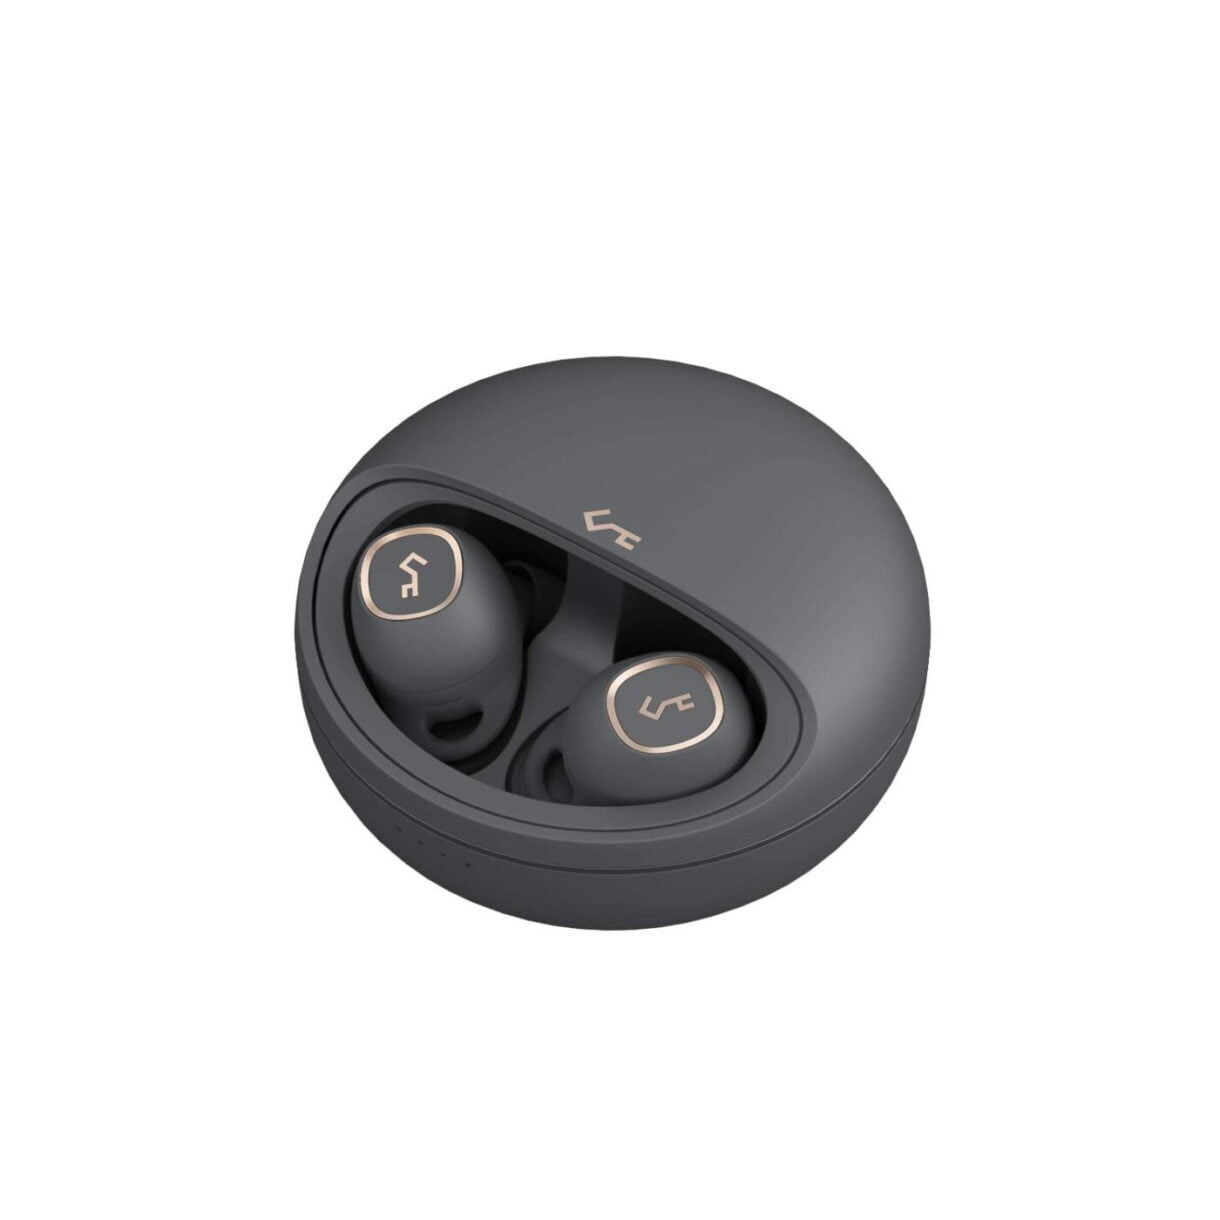 AUKEY Key Series T10, True Wireless Earbuds with Charging Case